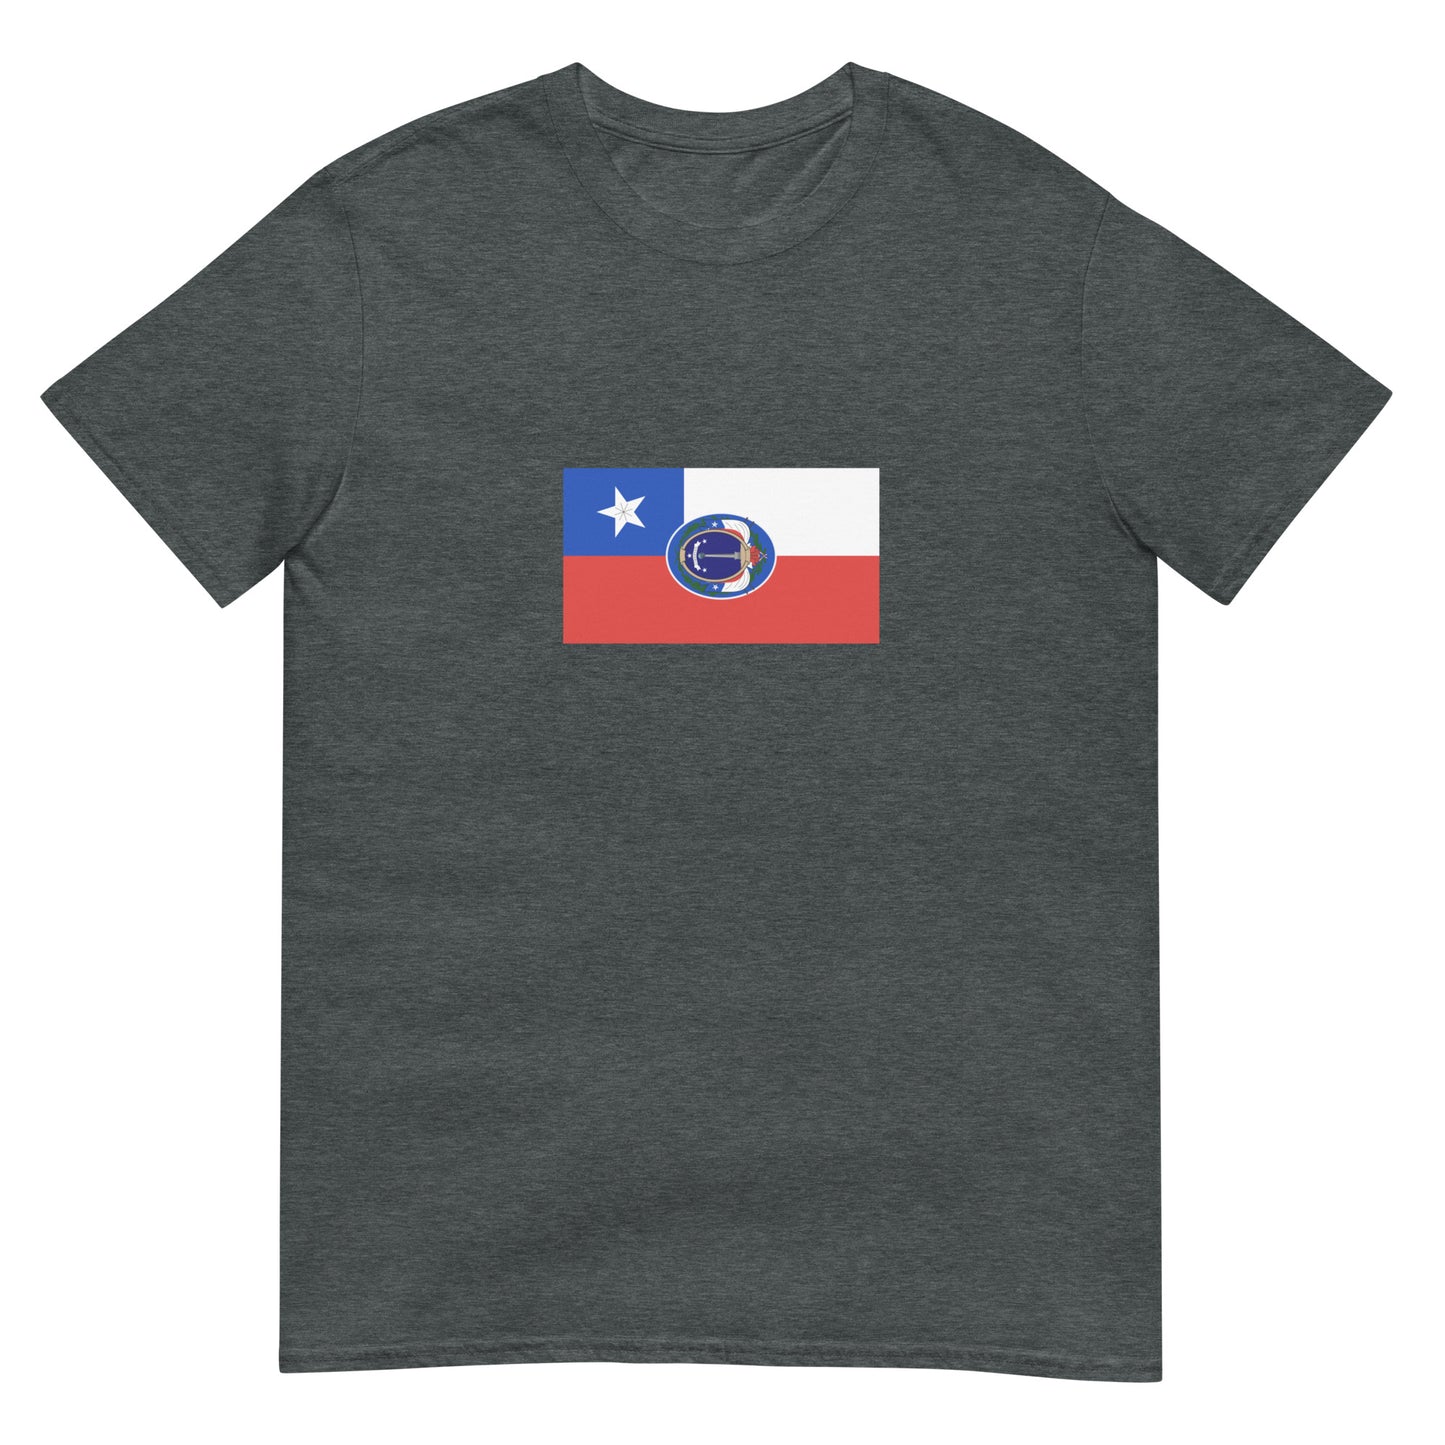 Chile - First Chilean Republic (1818-1834) | Historical Flag Short-Sleeve Unisex T-Shirt